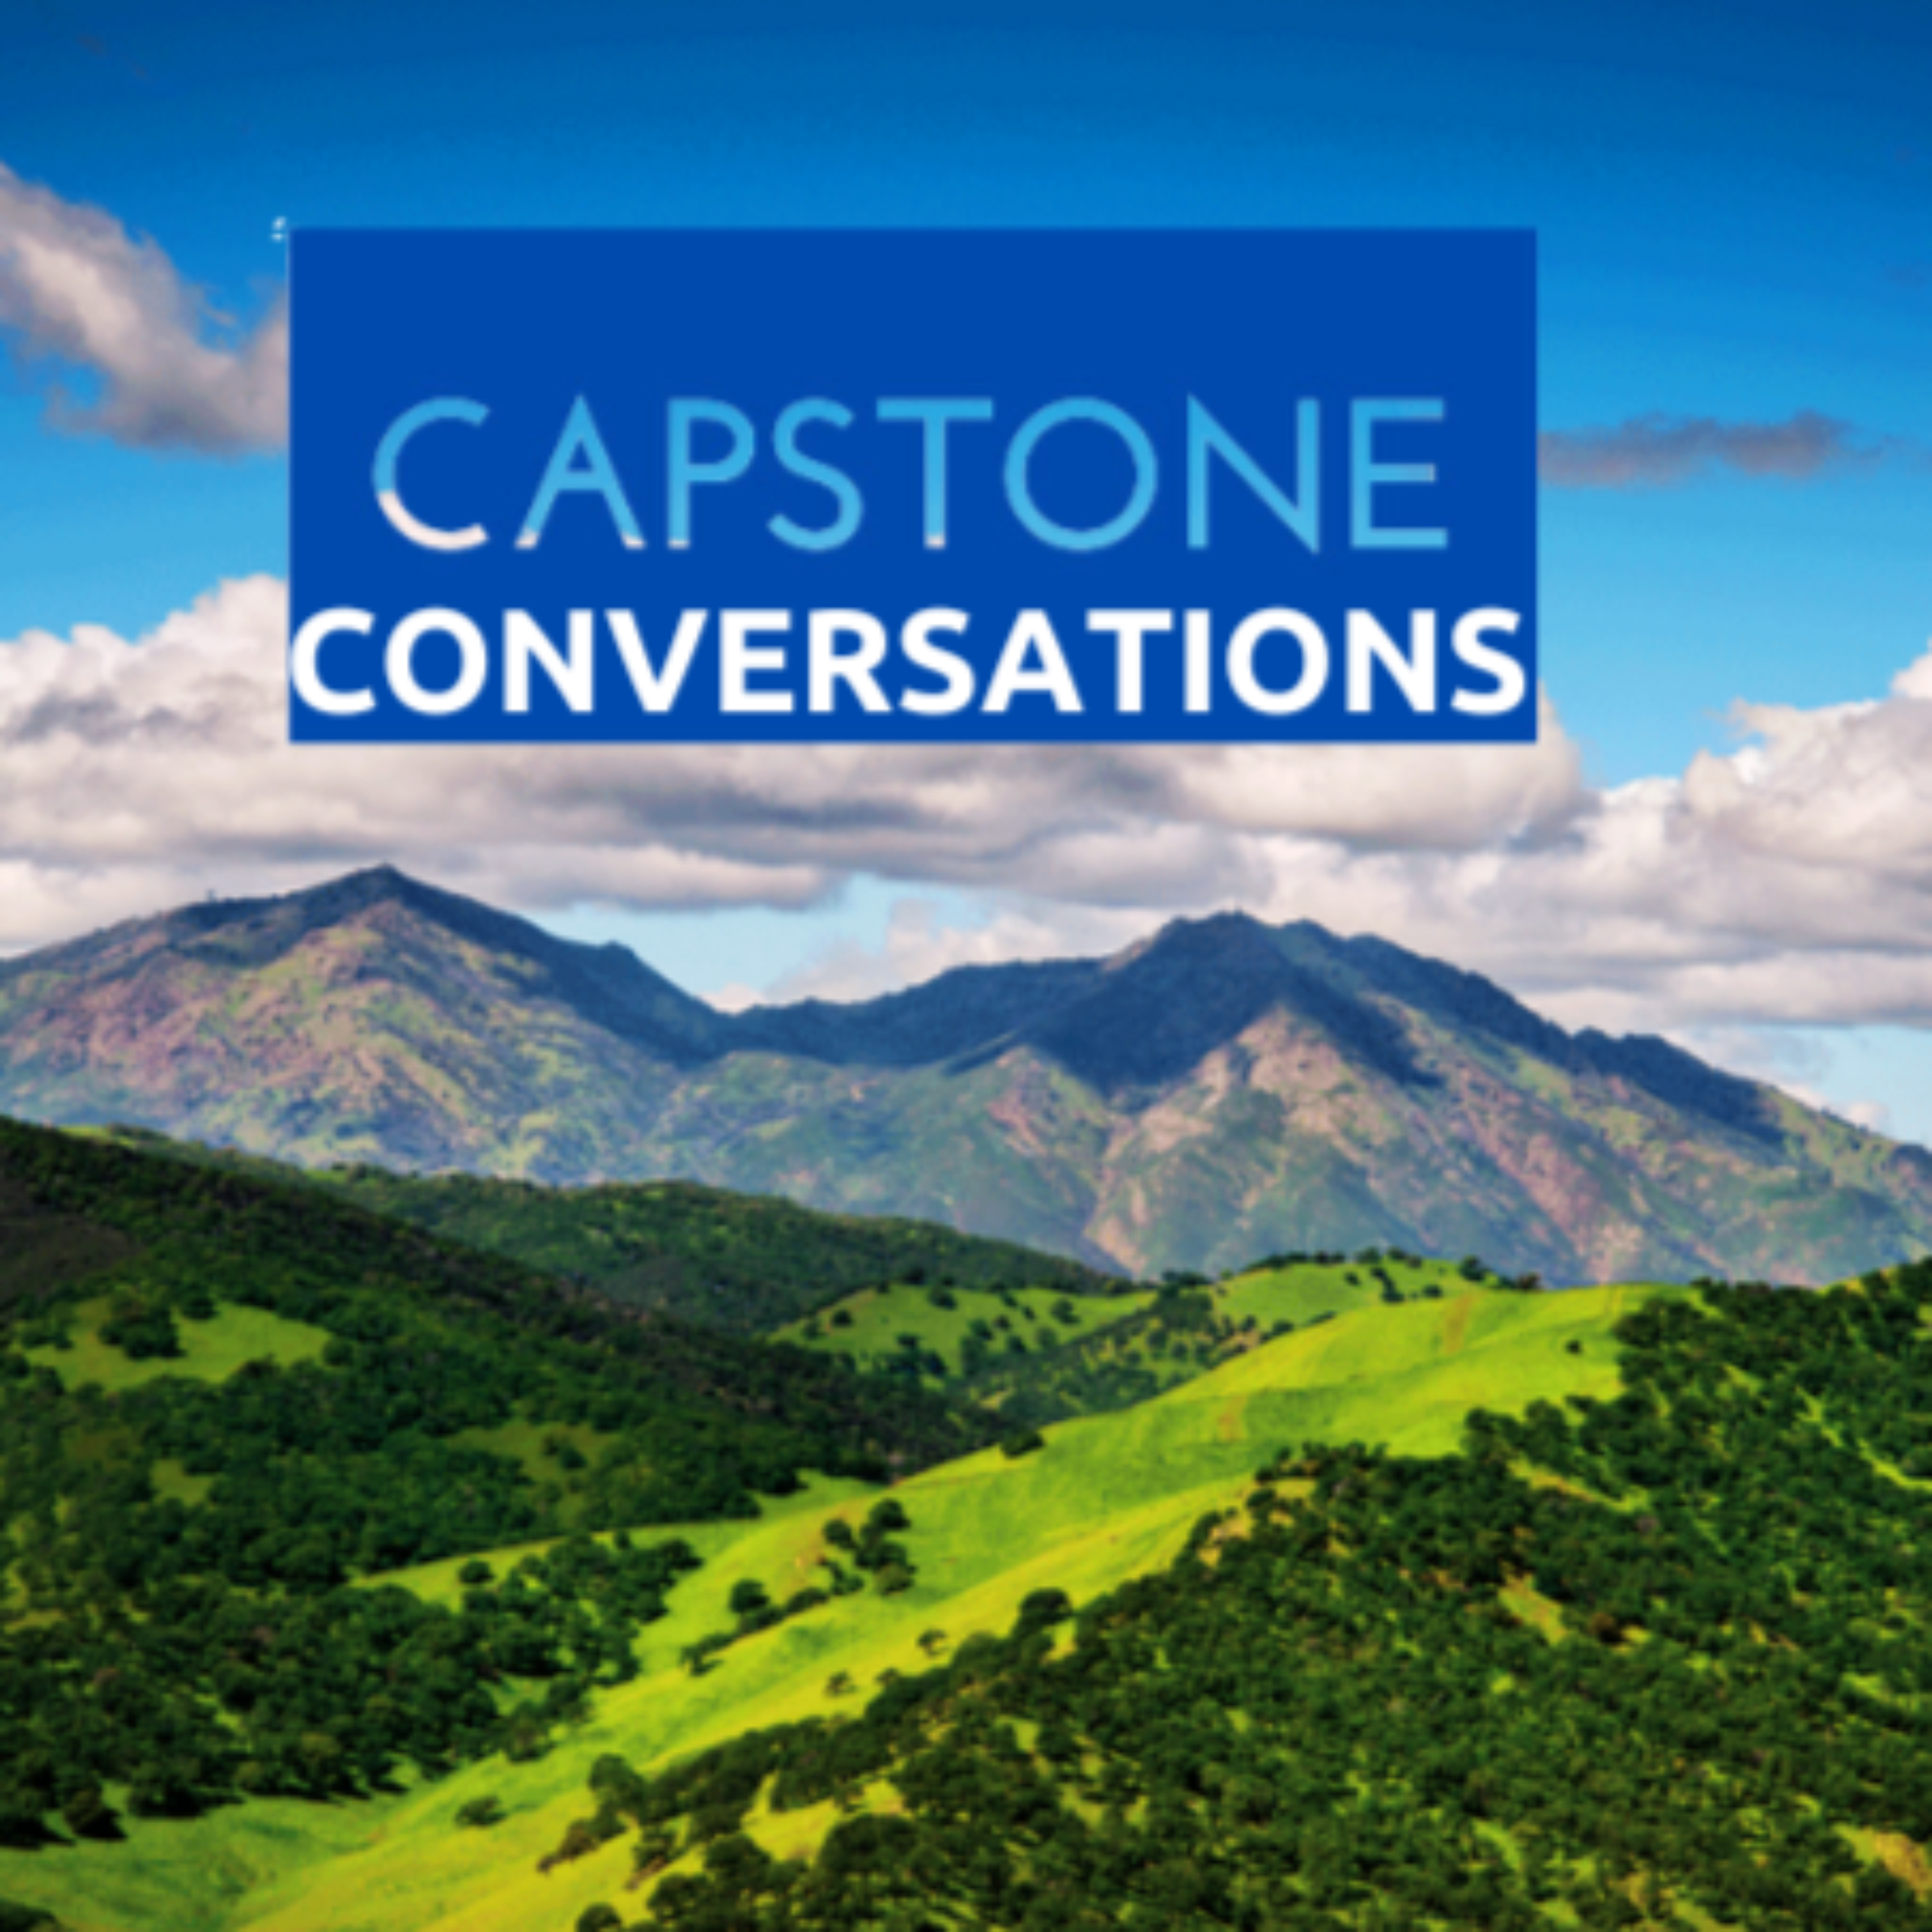 Capstone's Jared Asch Talks Contra Costa County Innovation With Ken Carlson